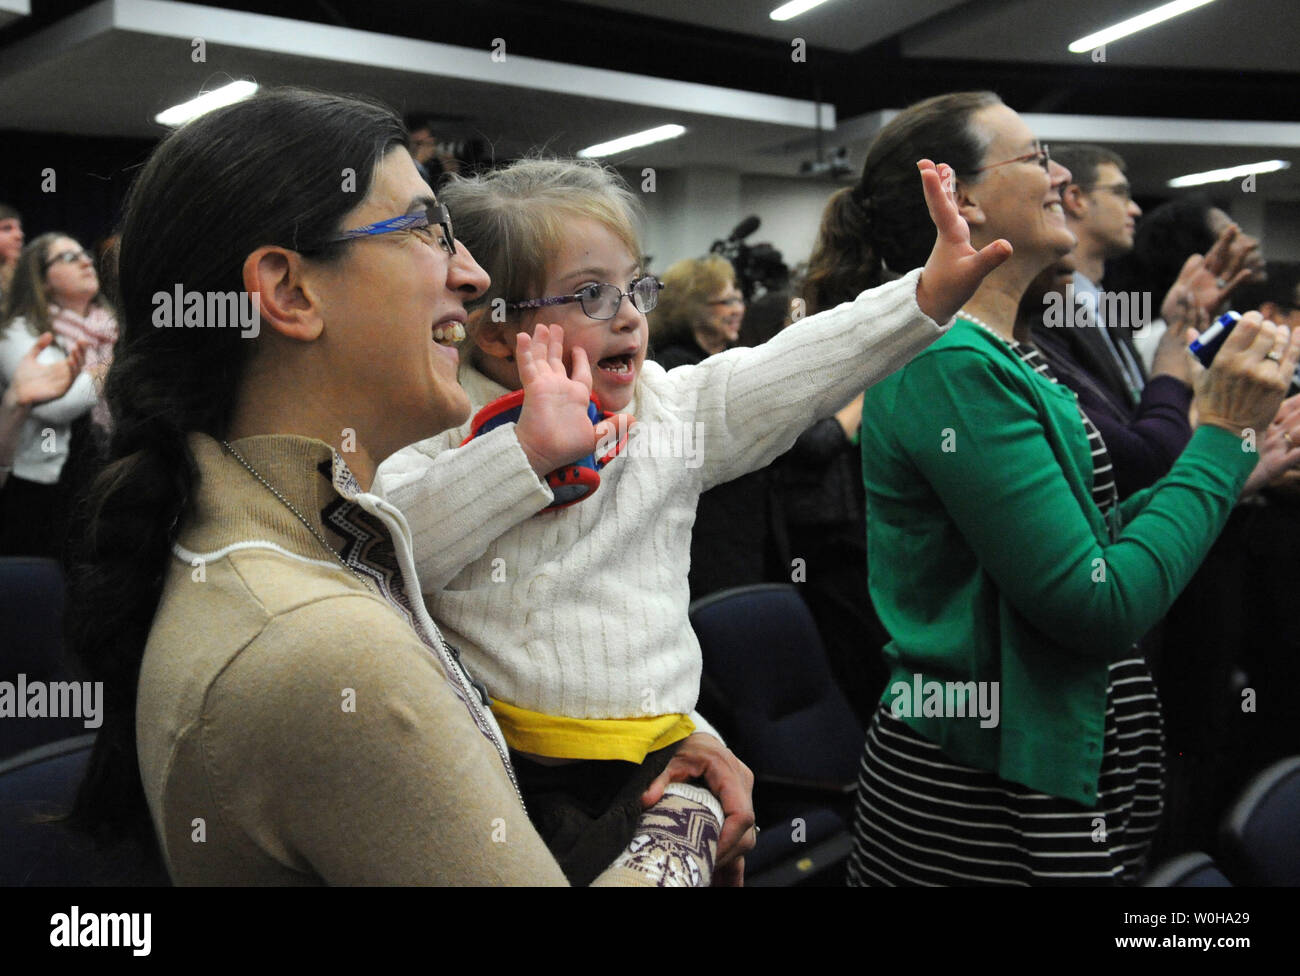 Hope Katz-Zogby, age 3, applauds with her mother Elizabeth as they listen to U.S. President Barack Obama discuss the successes of the Affordable Care Act in the Eisenhower Executive Office Building in Washington, DC on December 3, 2013.   Hope, from Baltimore, Maryland, has Down Syndrome but is guaranteed health insurance under the ACA, since insurance companies cannot bar anyone with pre-existing medical conditions. Obama promised that his signature healthcare law was going to remain as long as he was president and that the troubled www.healthcare.gov website was working well for the vast maj Stock Photo